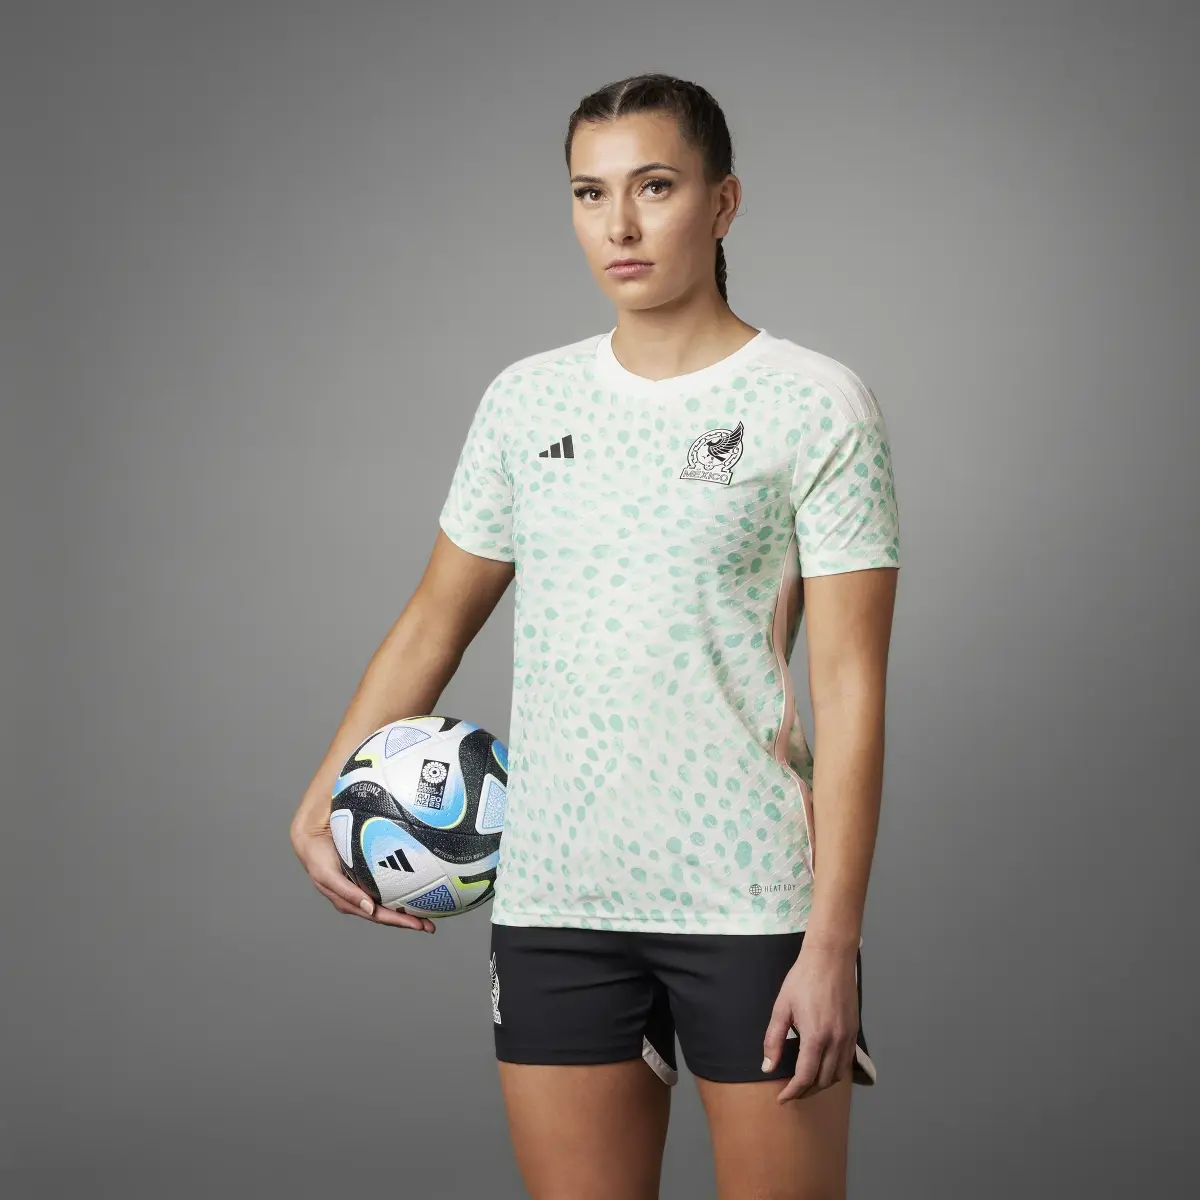 Adidas Mexico Women's Team 23 Away Authentic Jersey. 1